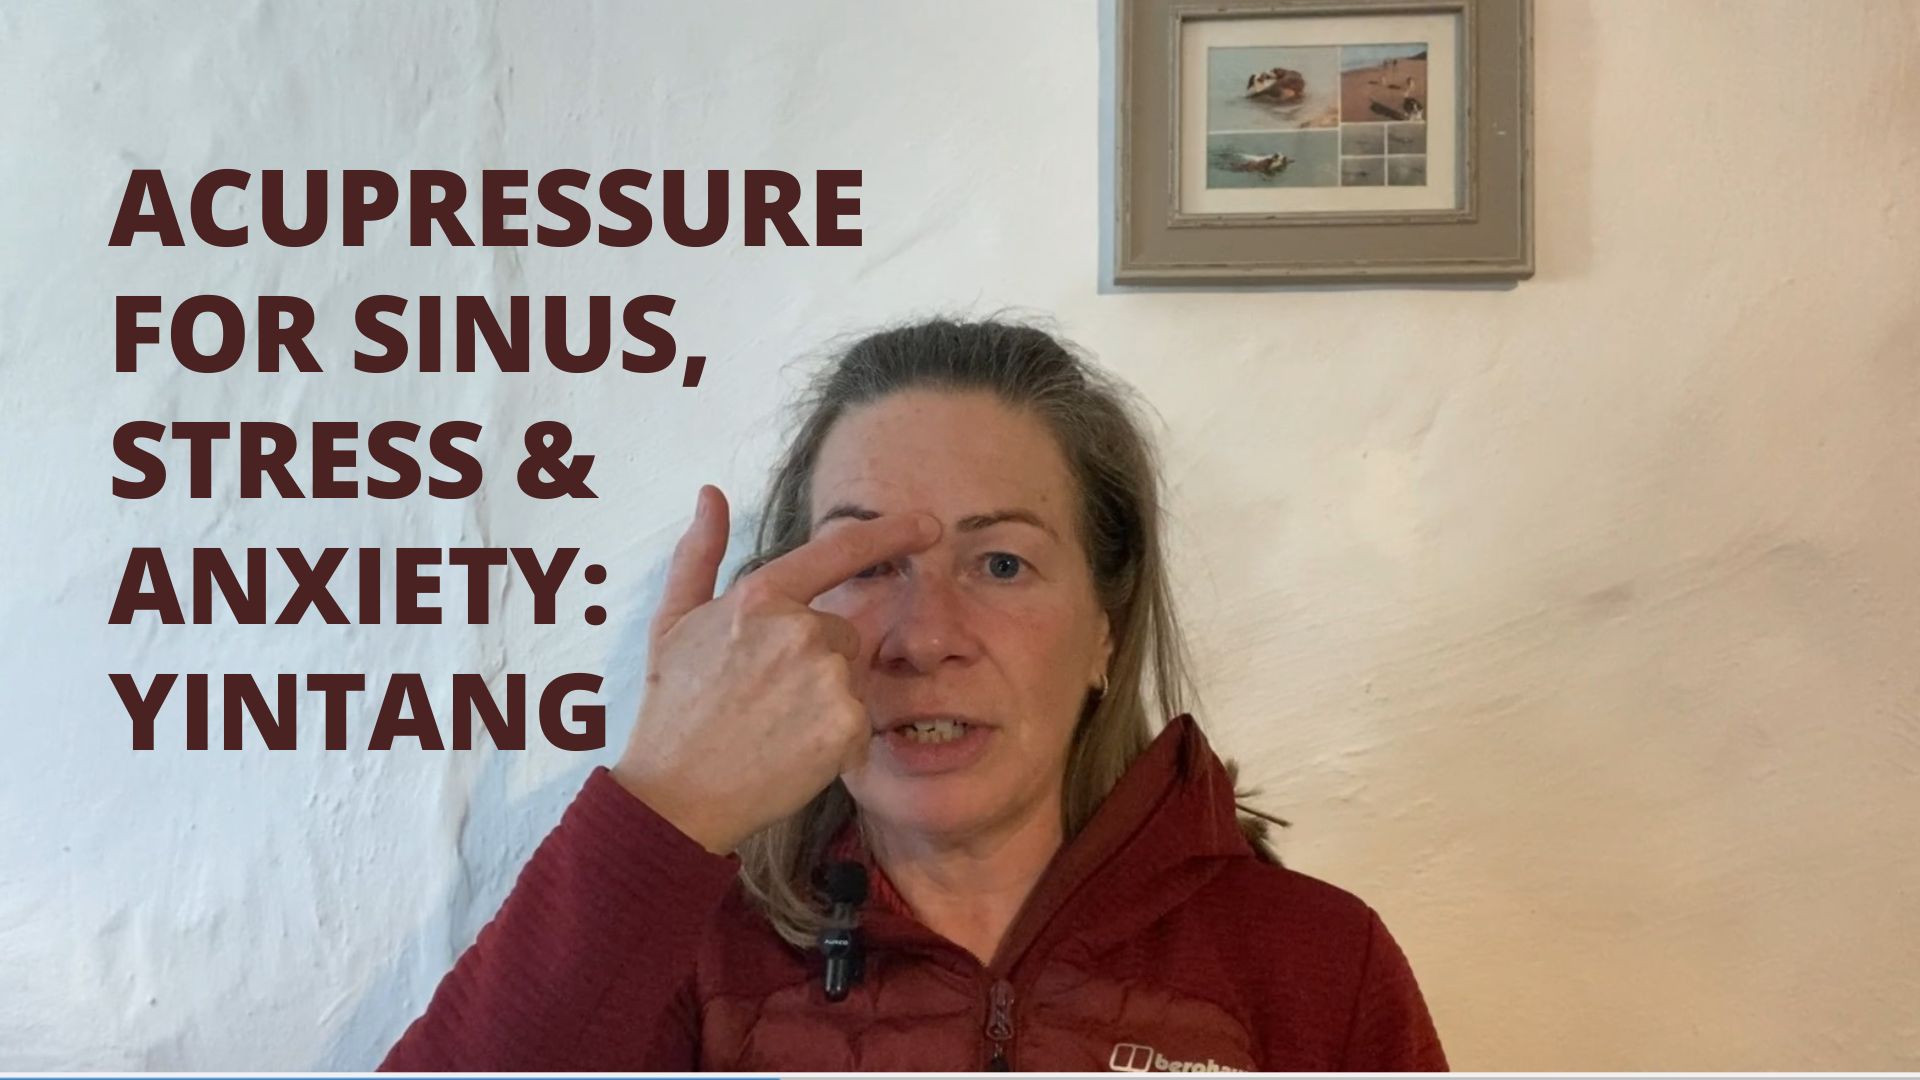 Acupressure for Sinus, Stress & Anxiety: Yintang